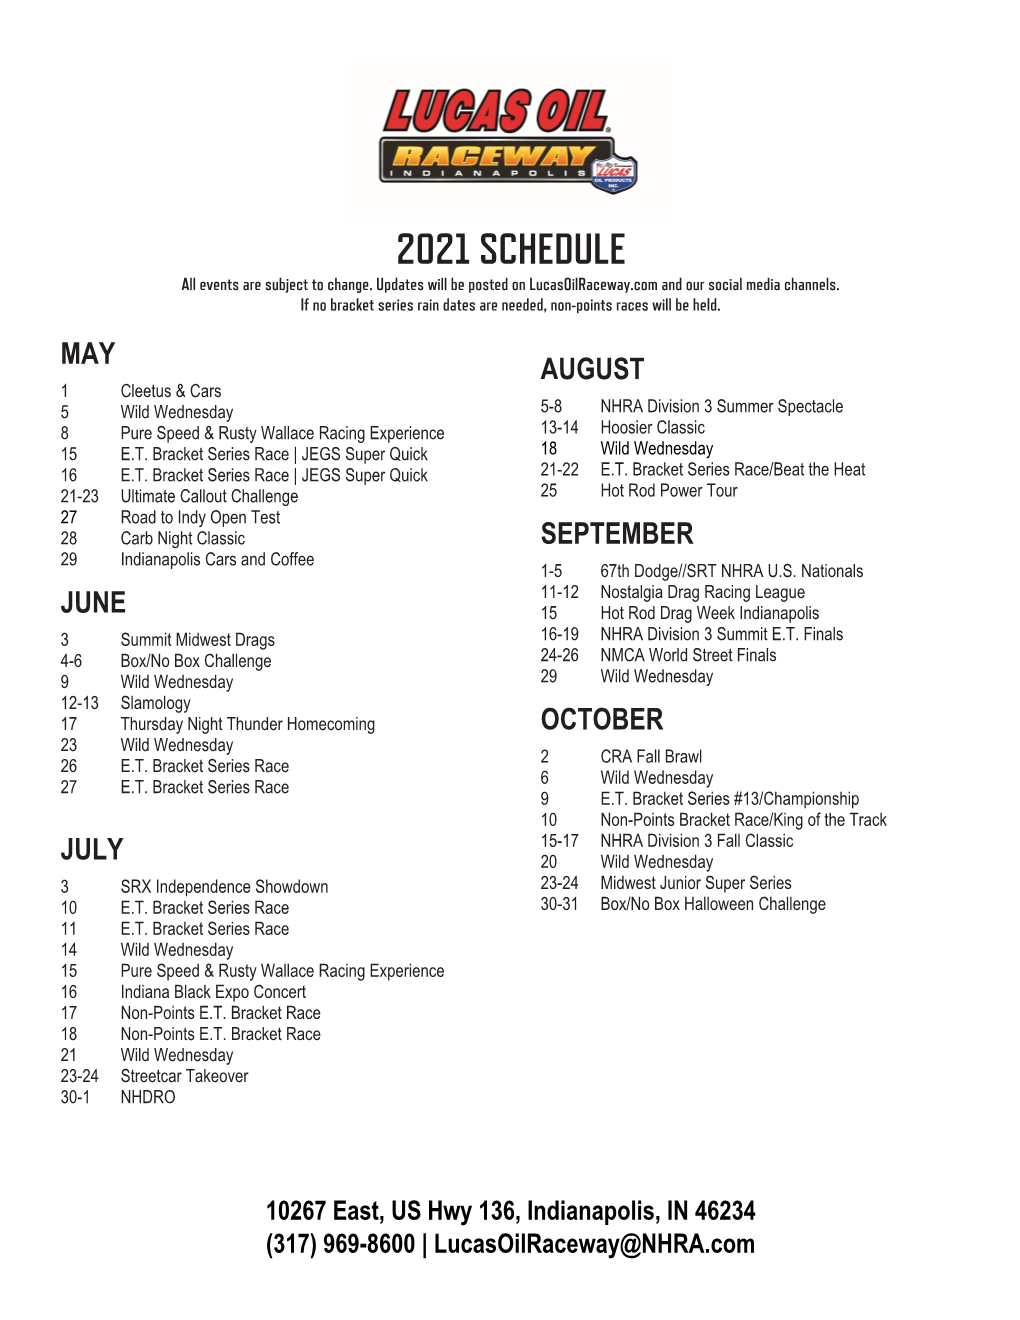 2021 SCHEDULE All Events Are Subject to Change